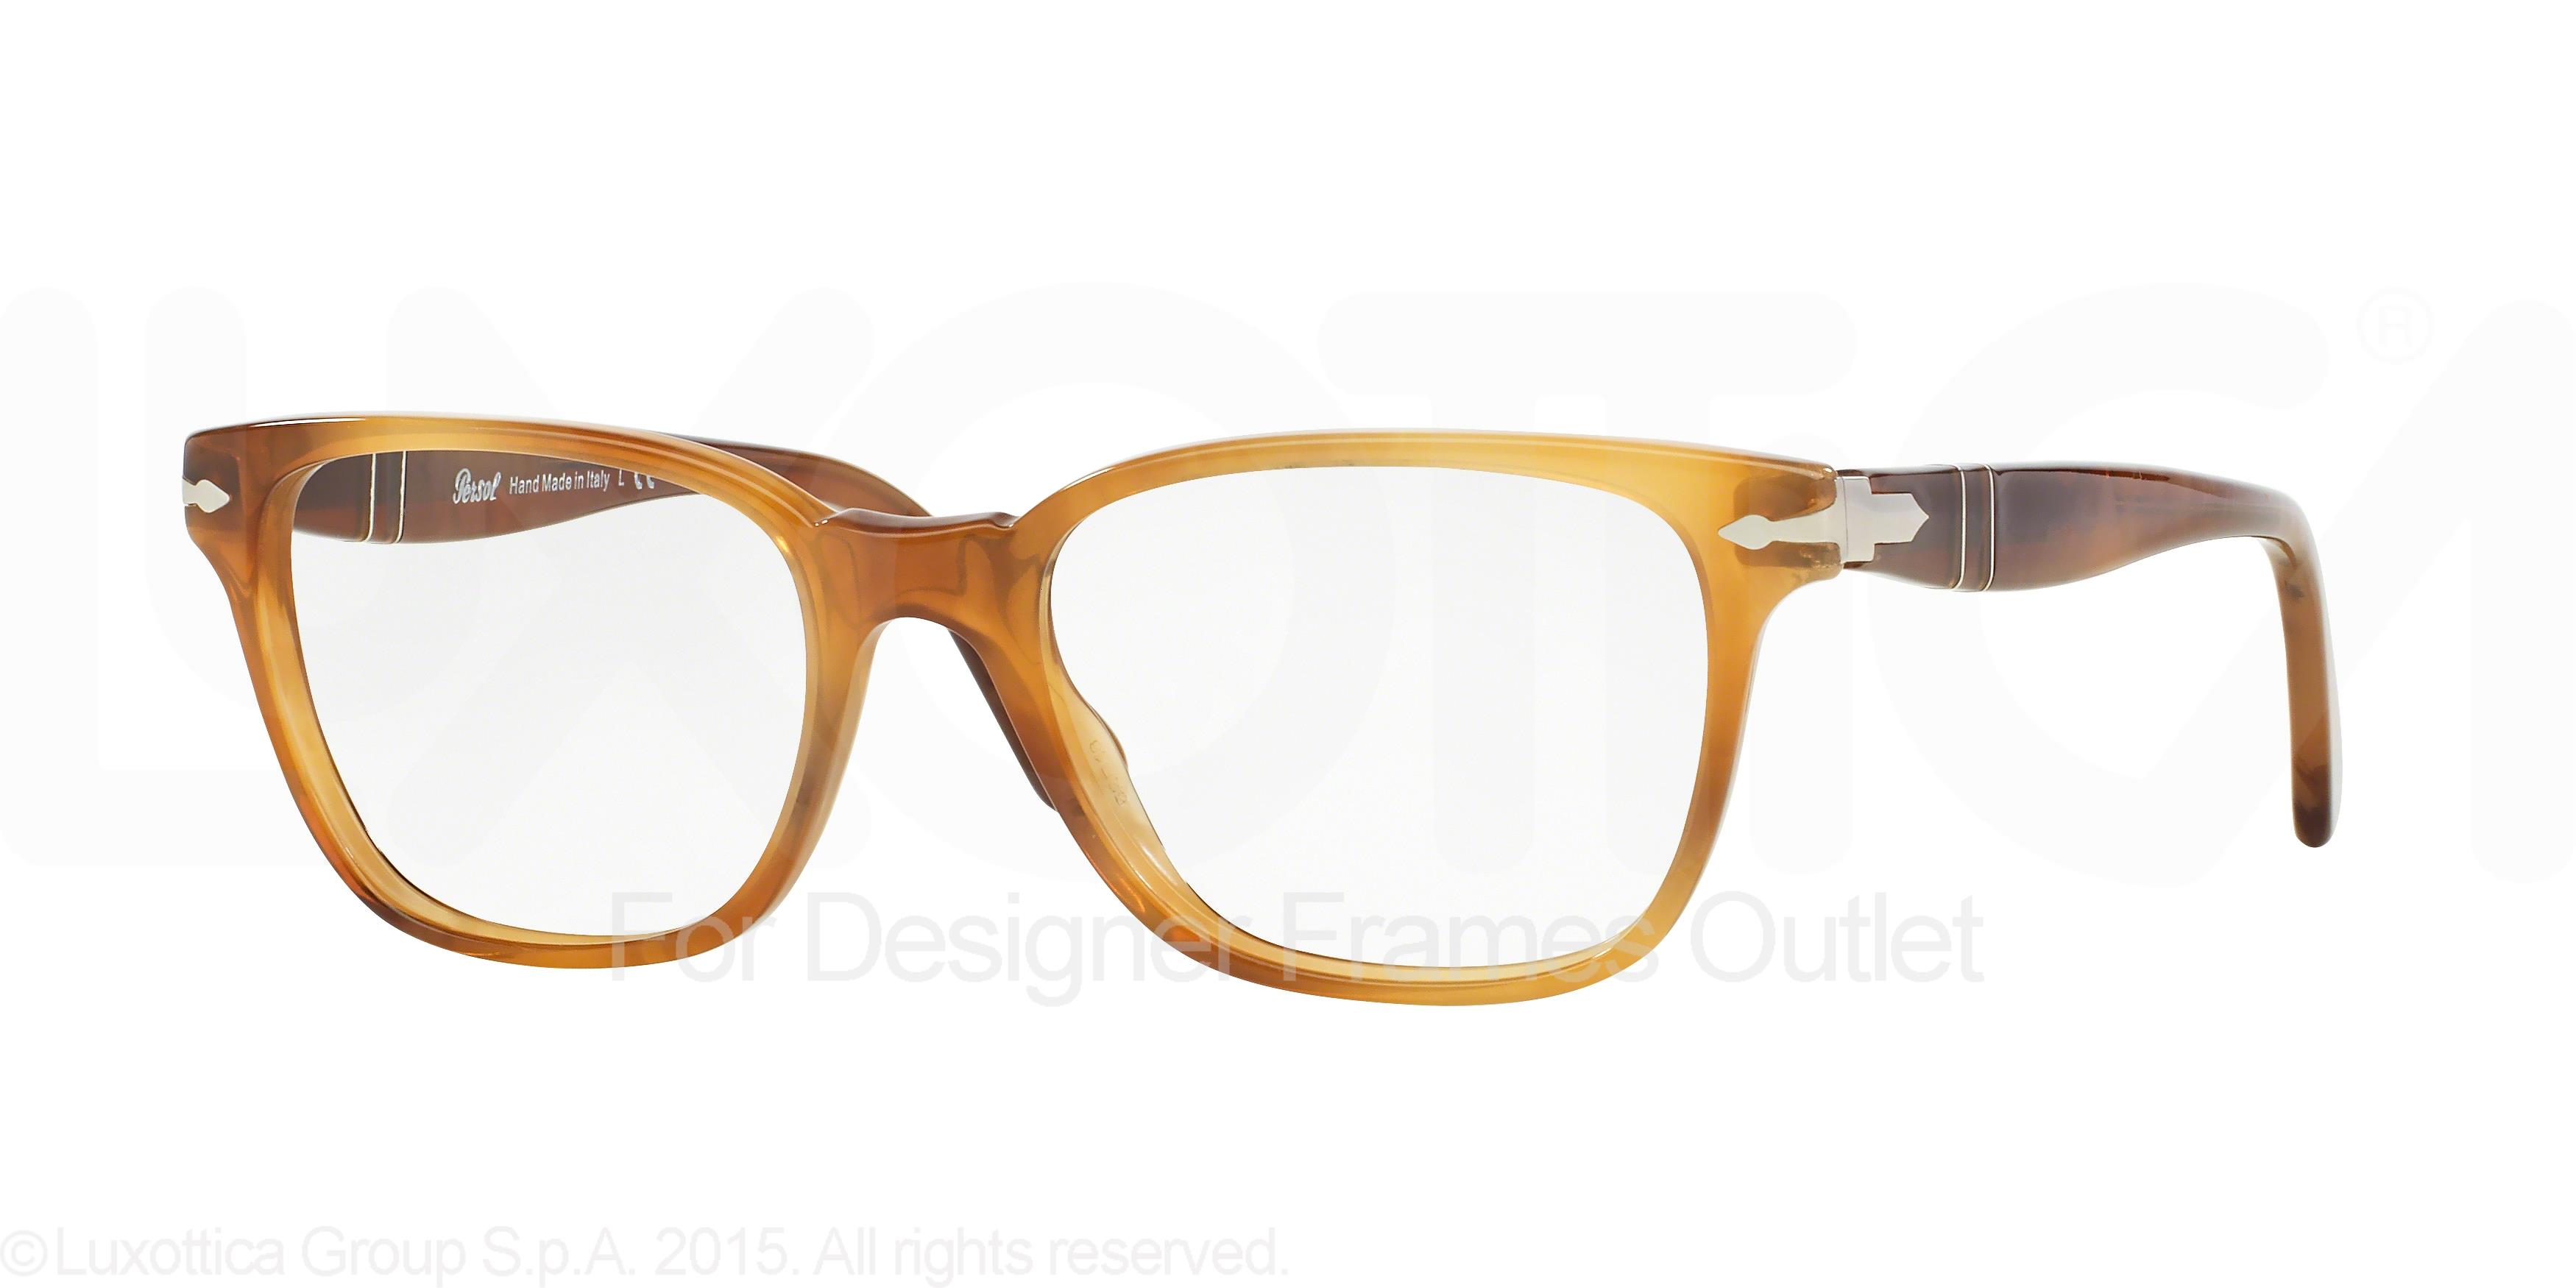 Picture of Persol Eyeglasses PO3003V